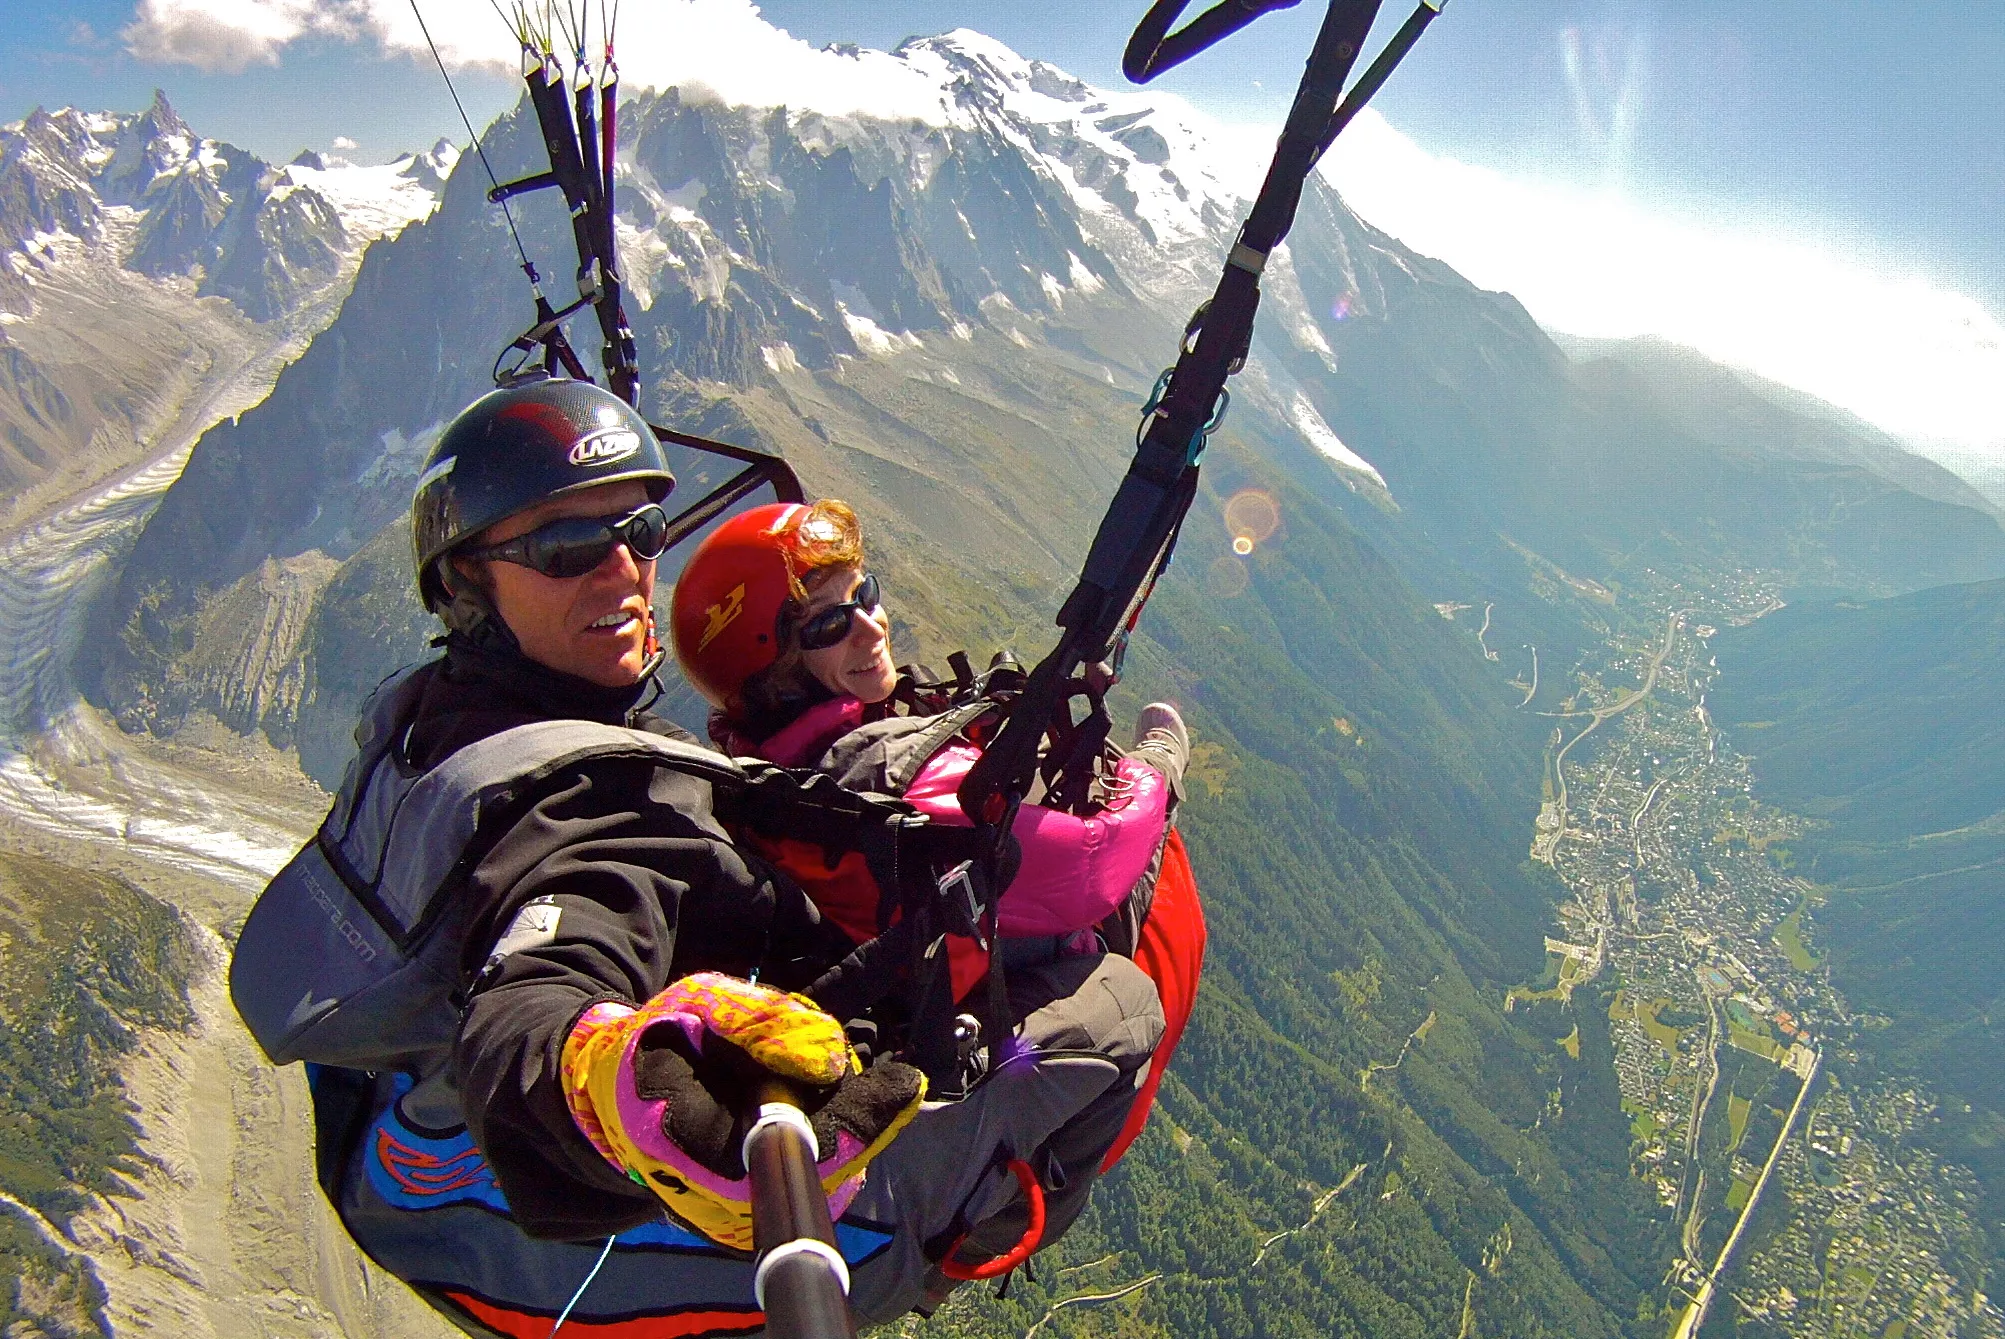 Kailash Parapente Chamonix in France, Europe | Paragliding - Rated 1.2